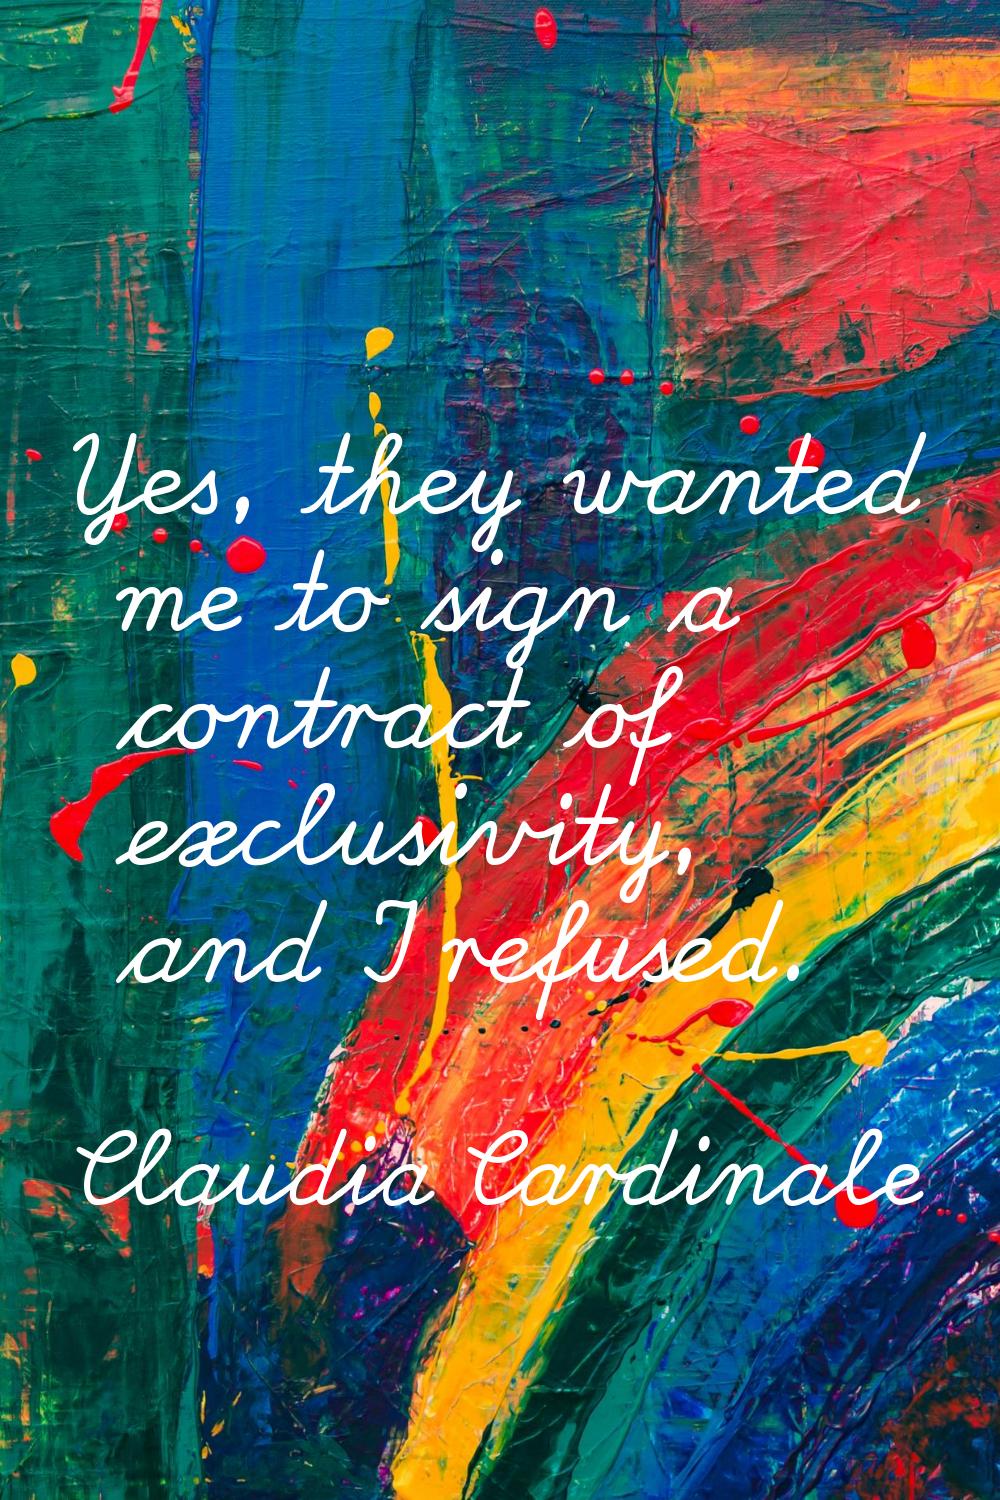 Yes, they wanted me to sign a contract of exclusivity, and I refused.